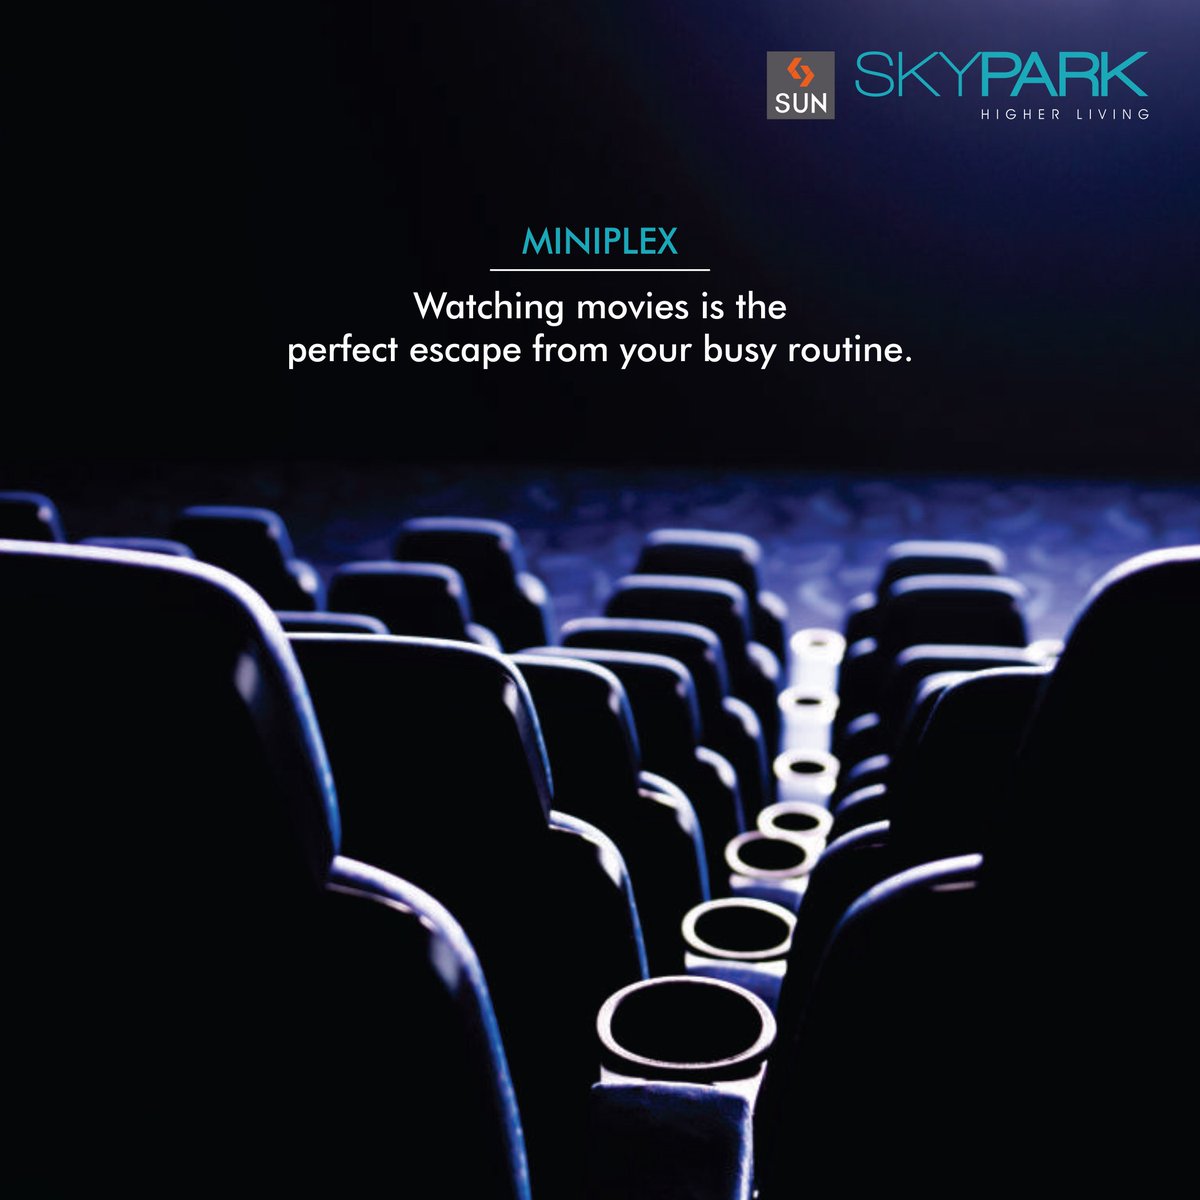 #Cinema - a perfect escape for you. Watch & enjoy your favourite blockbuster movies at #SunSkypark. https://t.co/TEUz8nEvs4